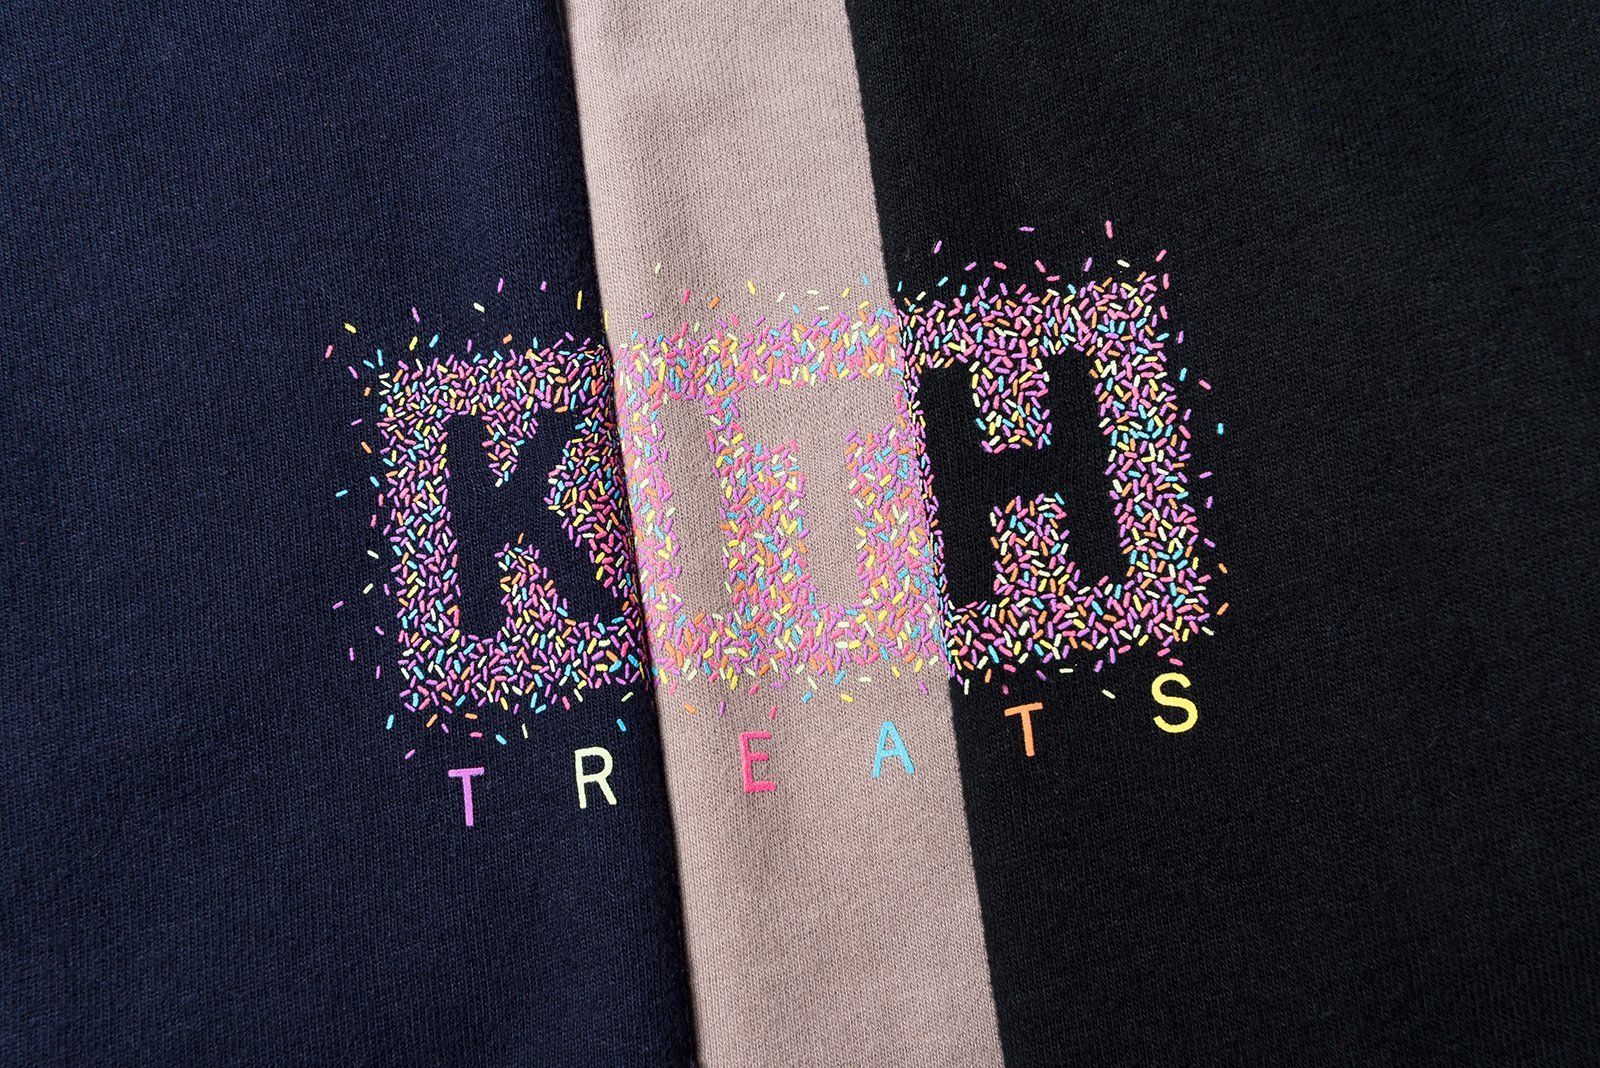 Kith Wallpapers